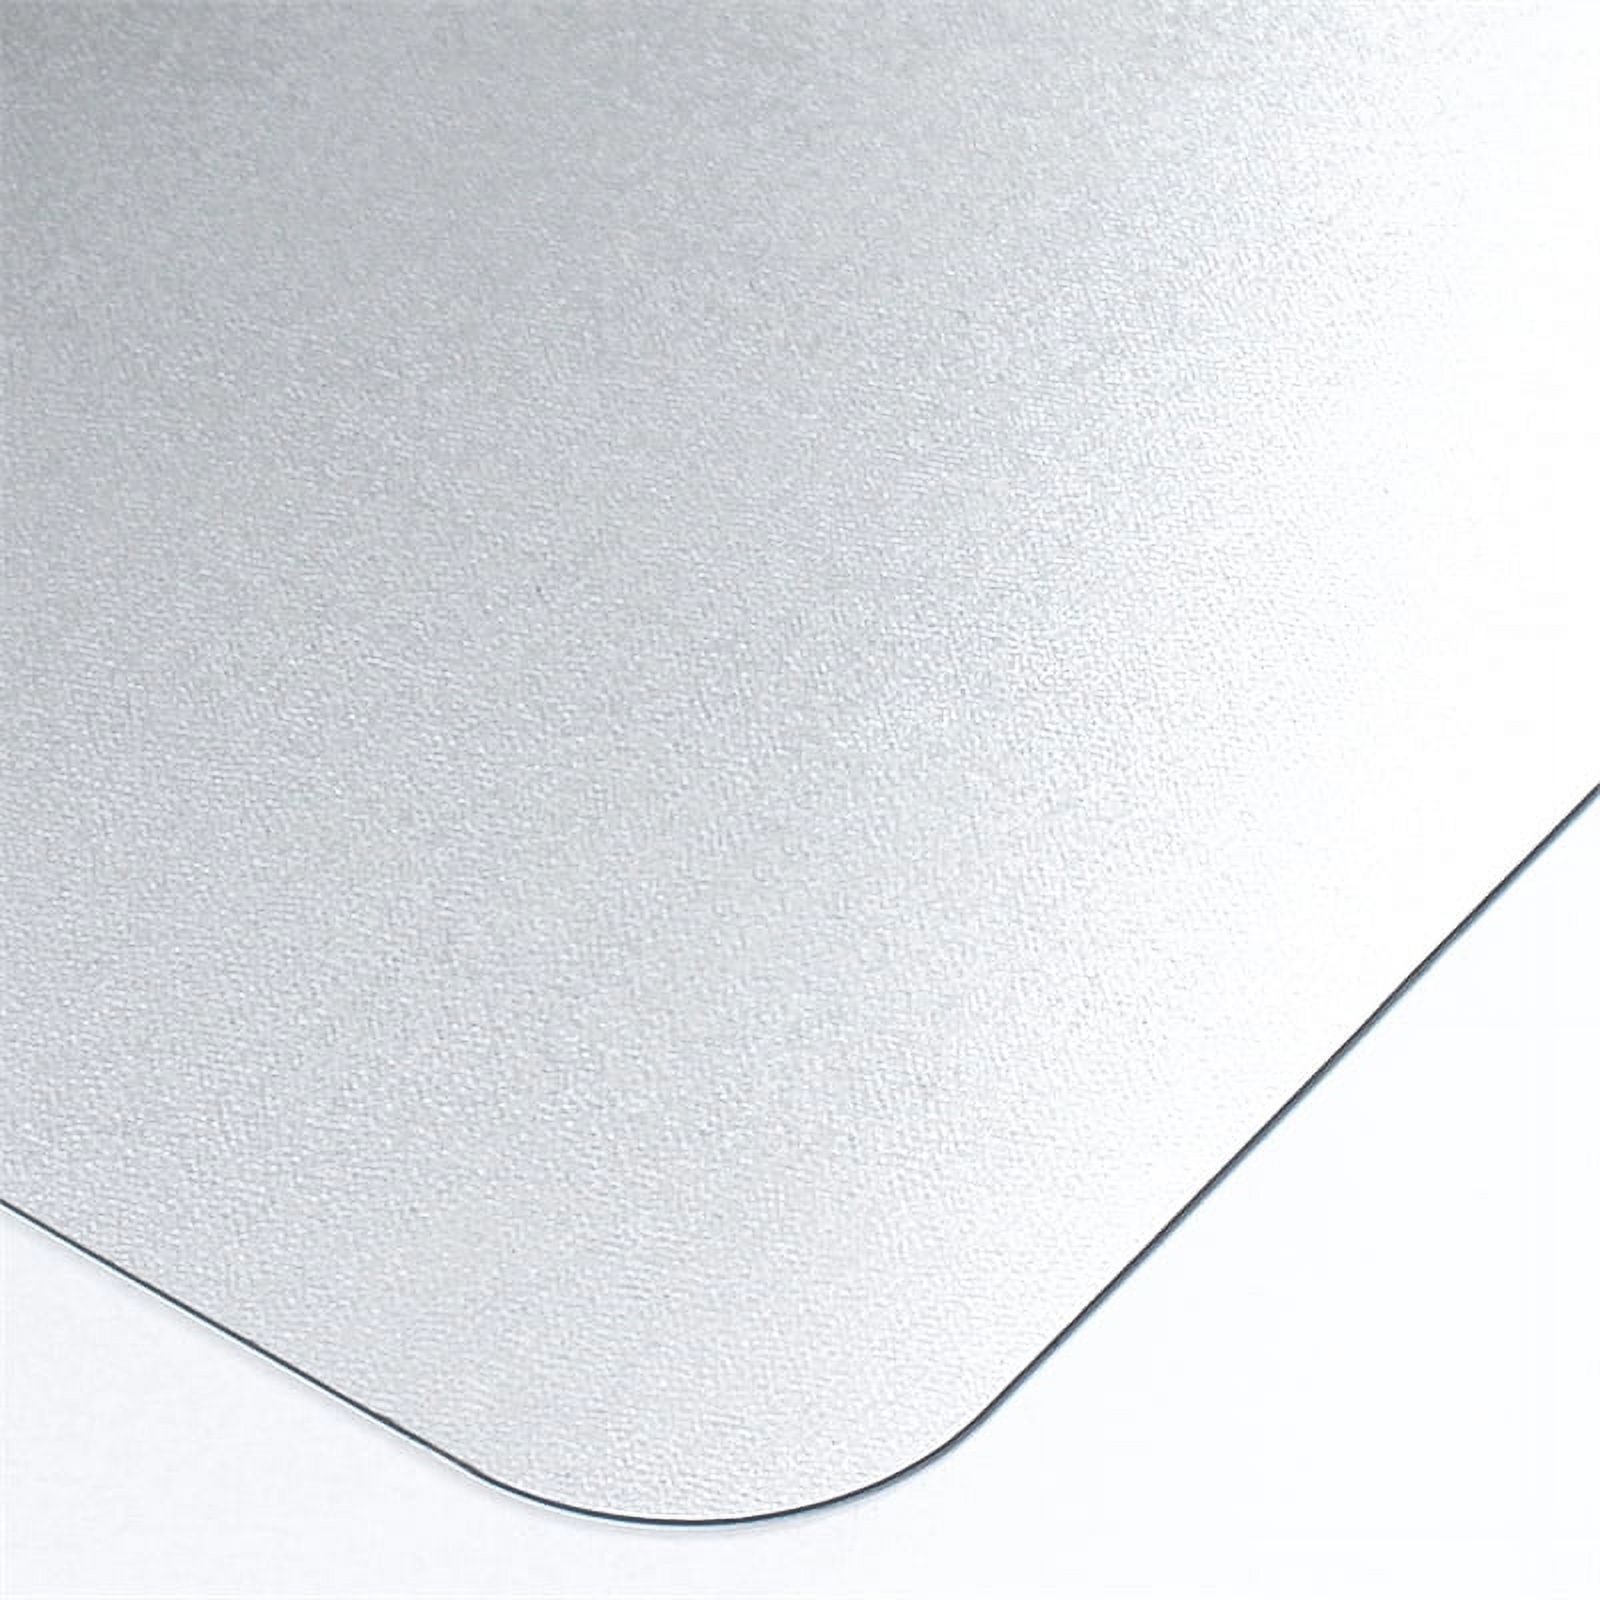 Pemberly Row Plastic Craft Table Protector Mat Clear Polycarbonate 35 x 71  